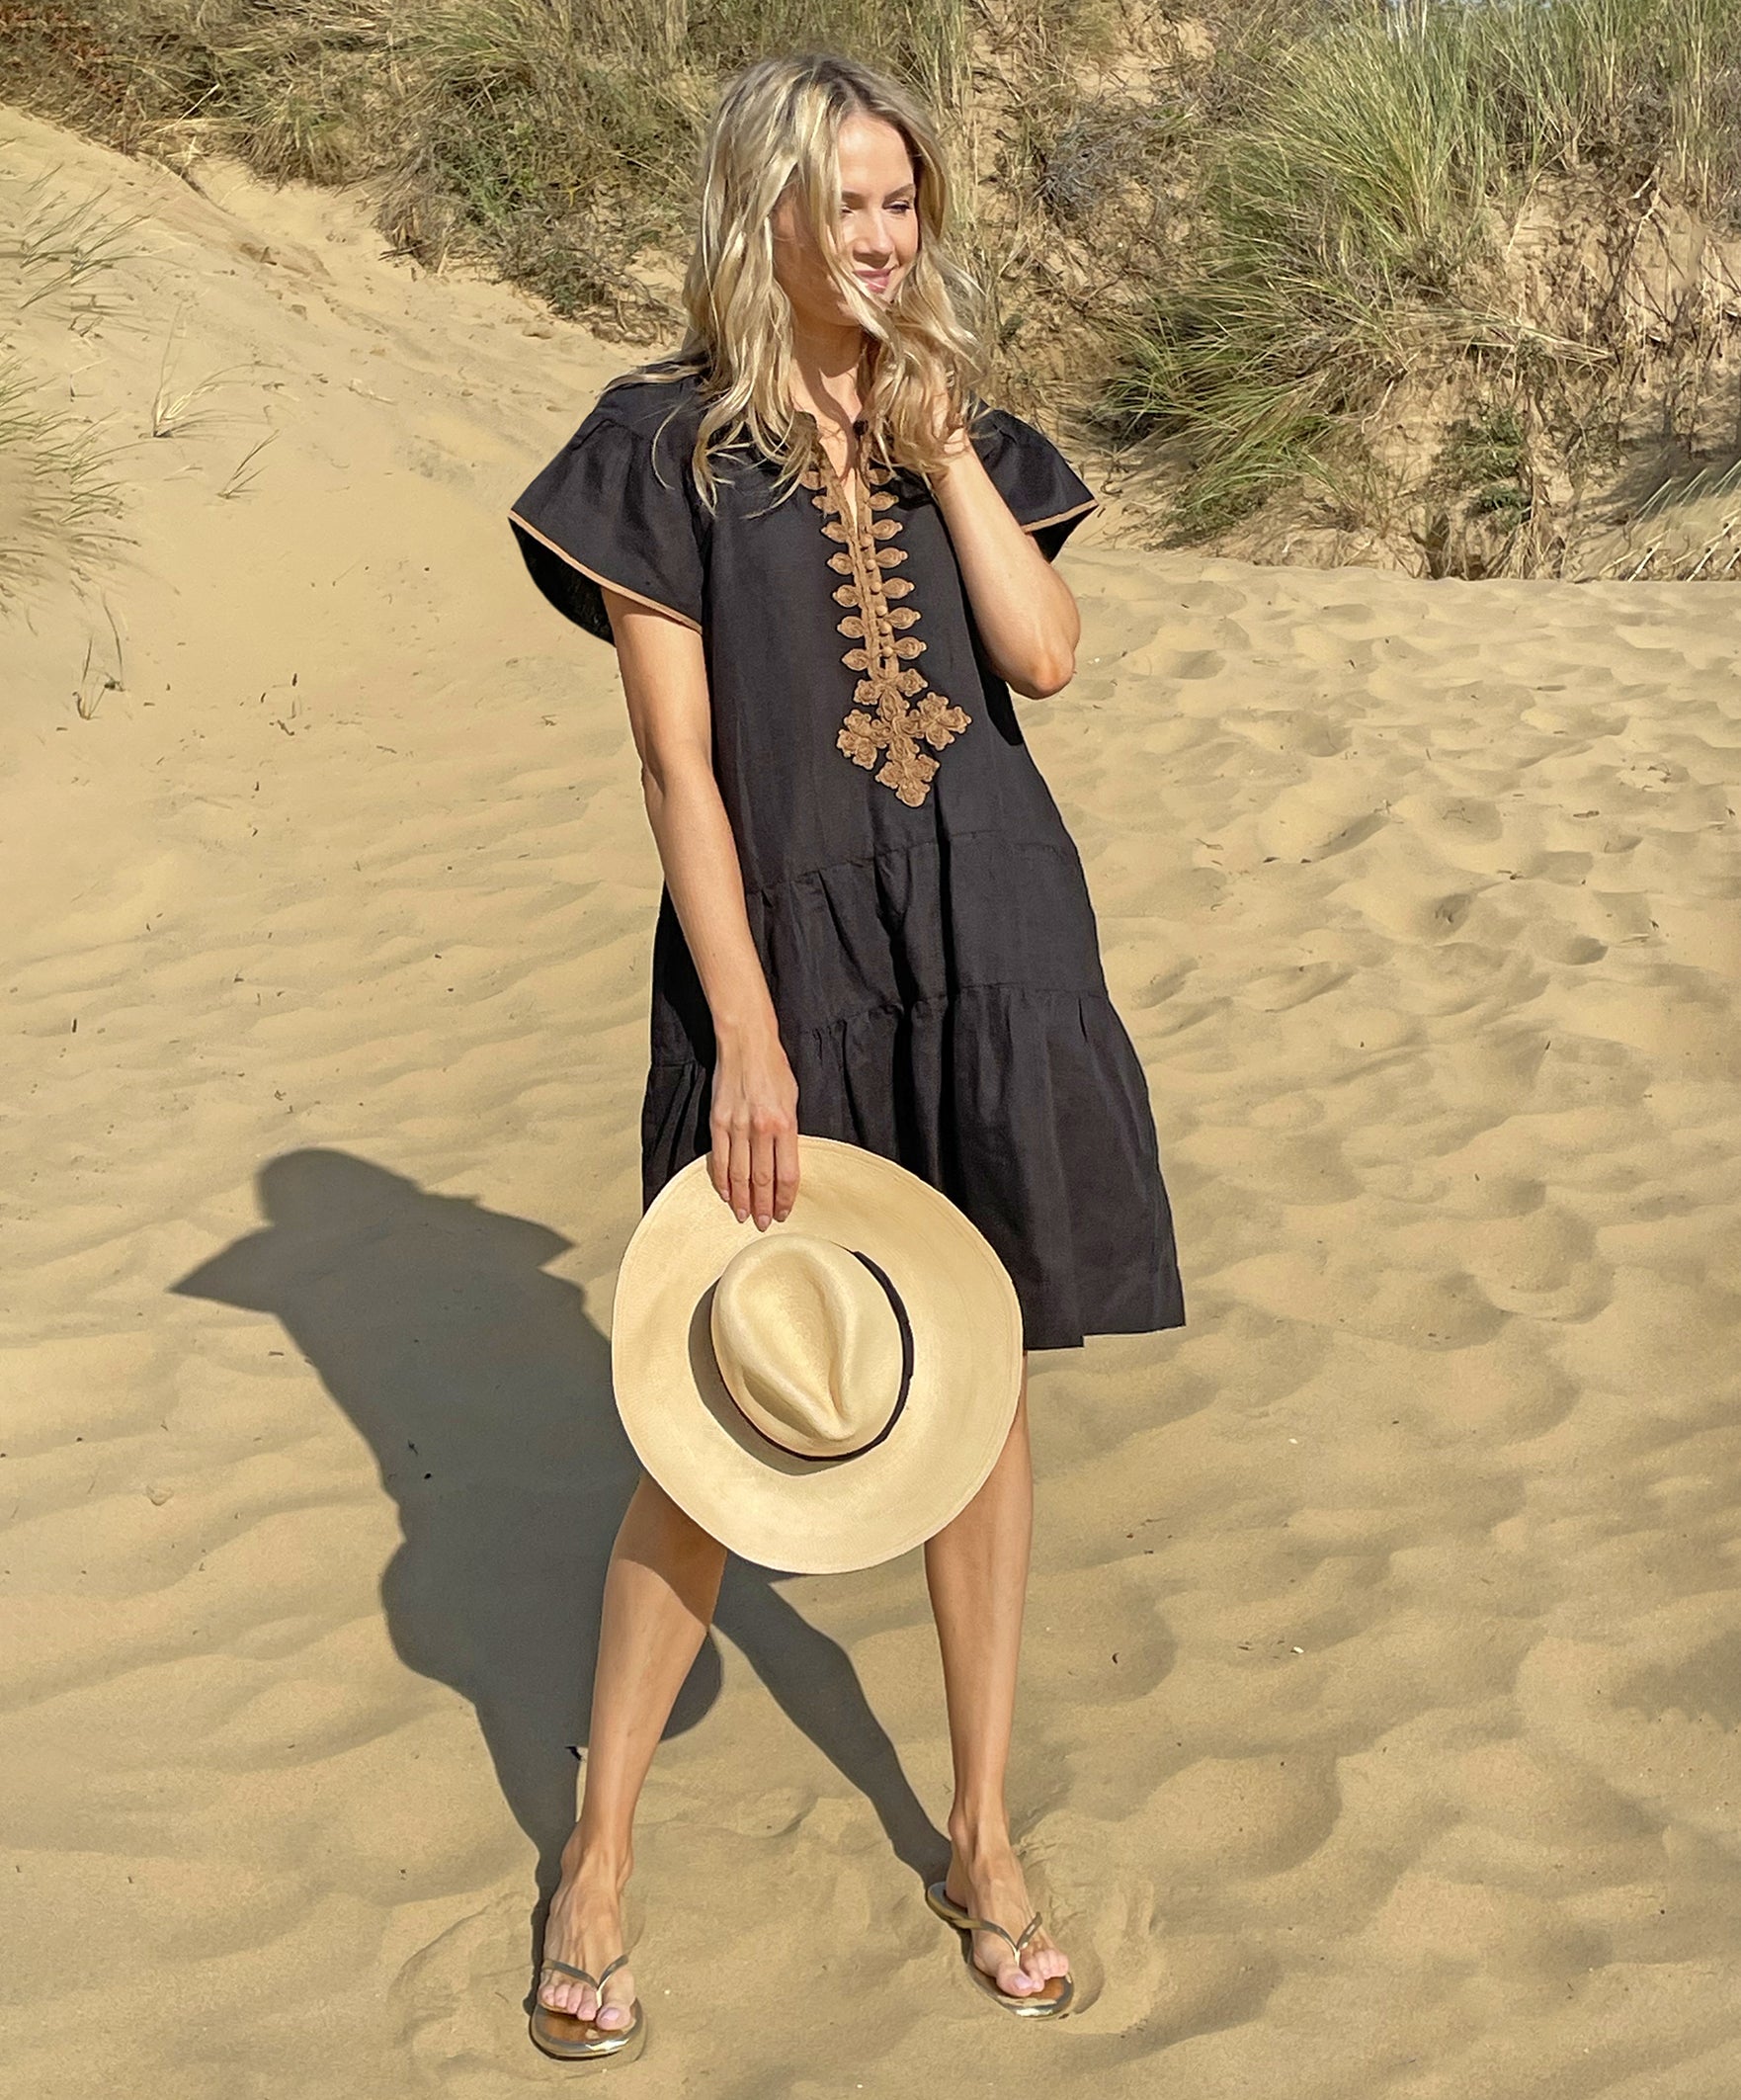 A model on a beach wearing the Rose and Rose Ischia dress in black cotton and holding an Anthony Peto Panama hat.